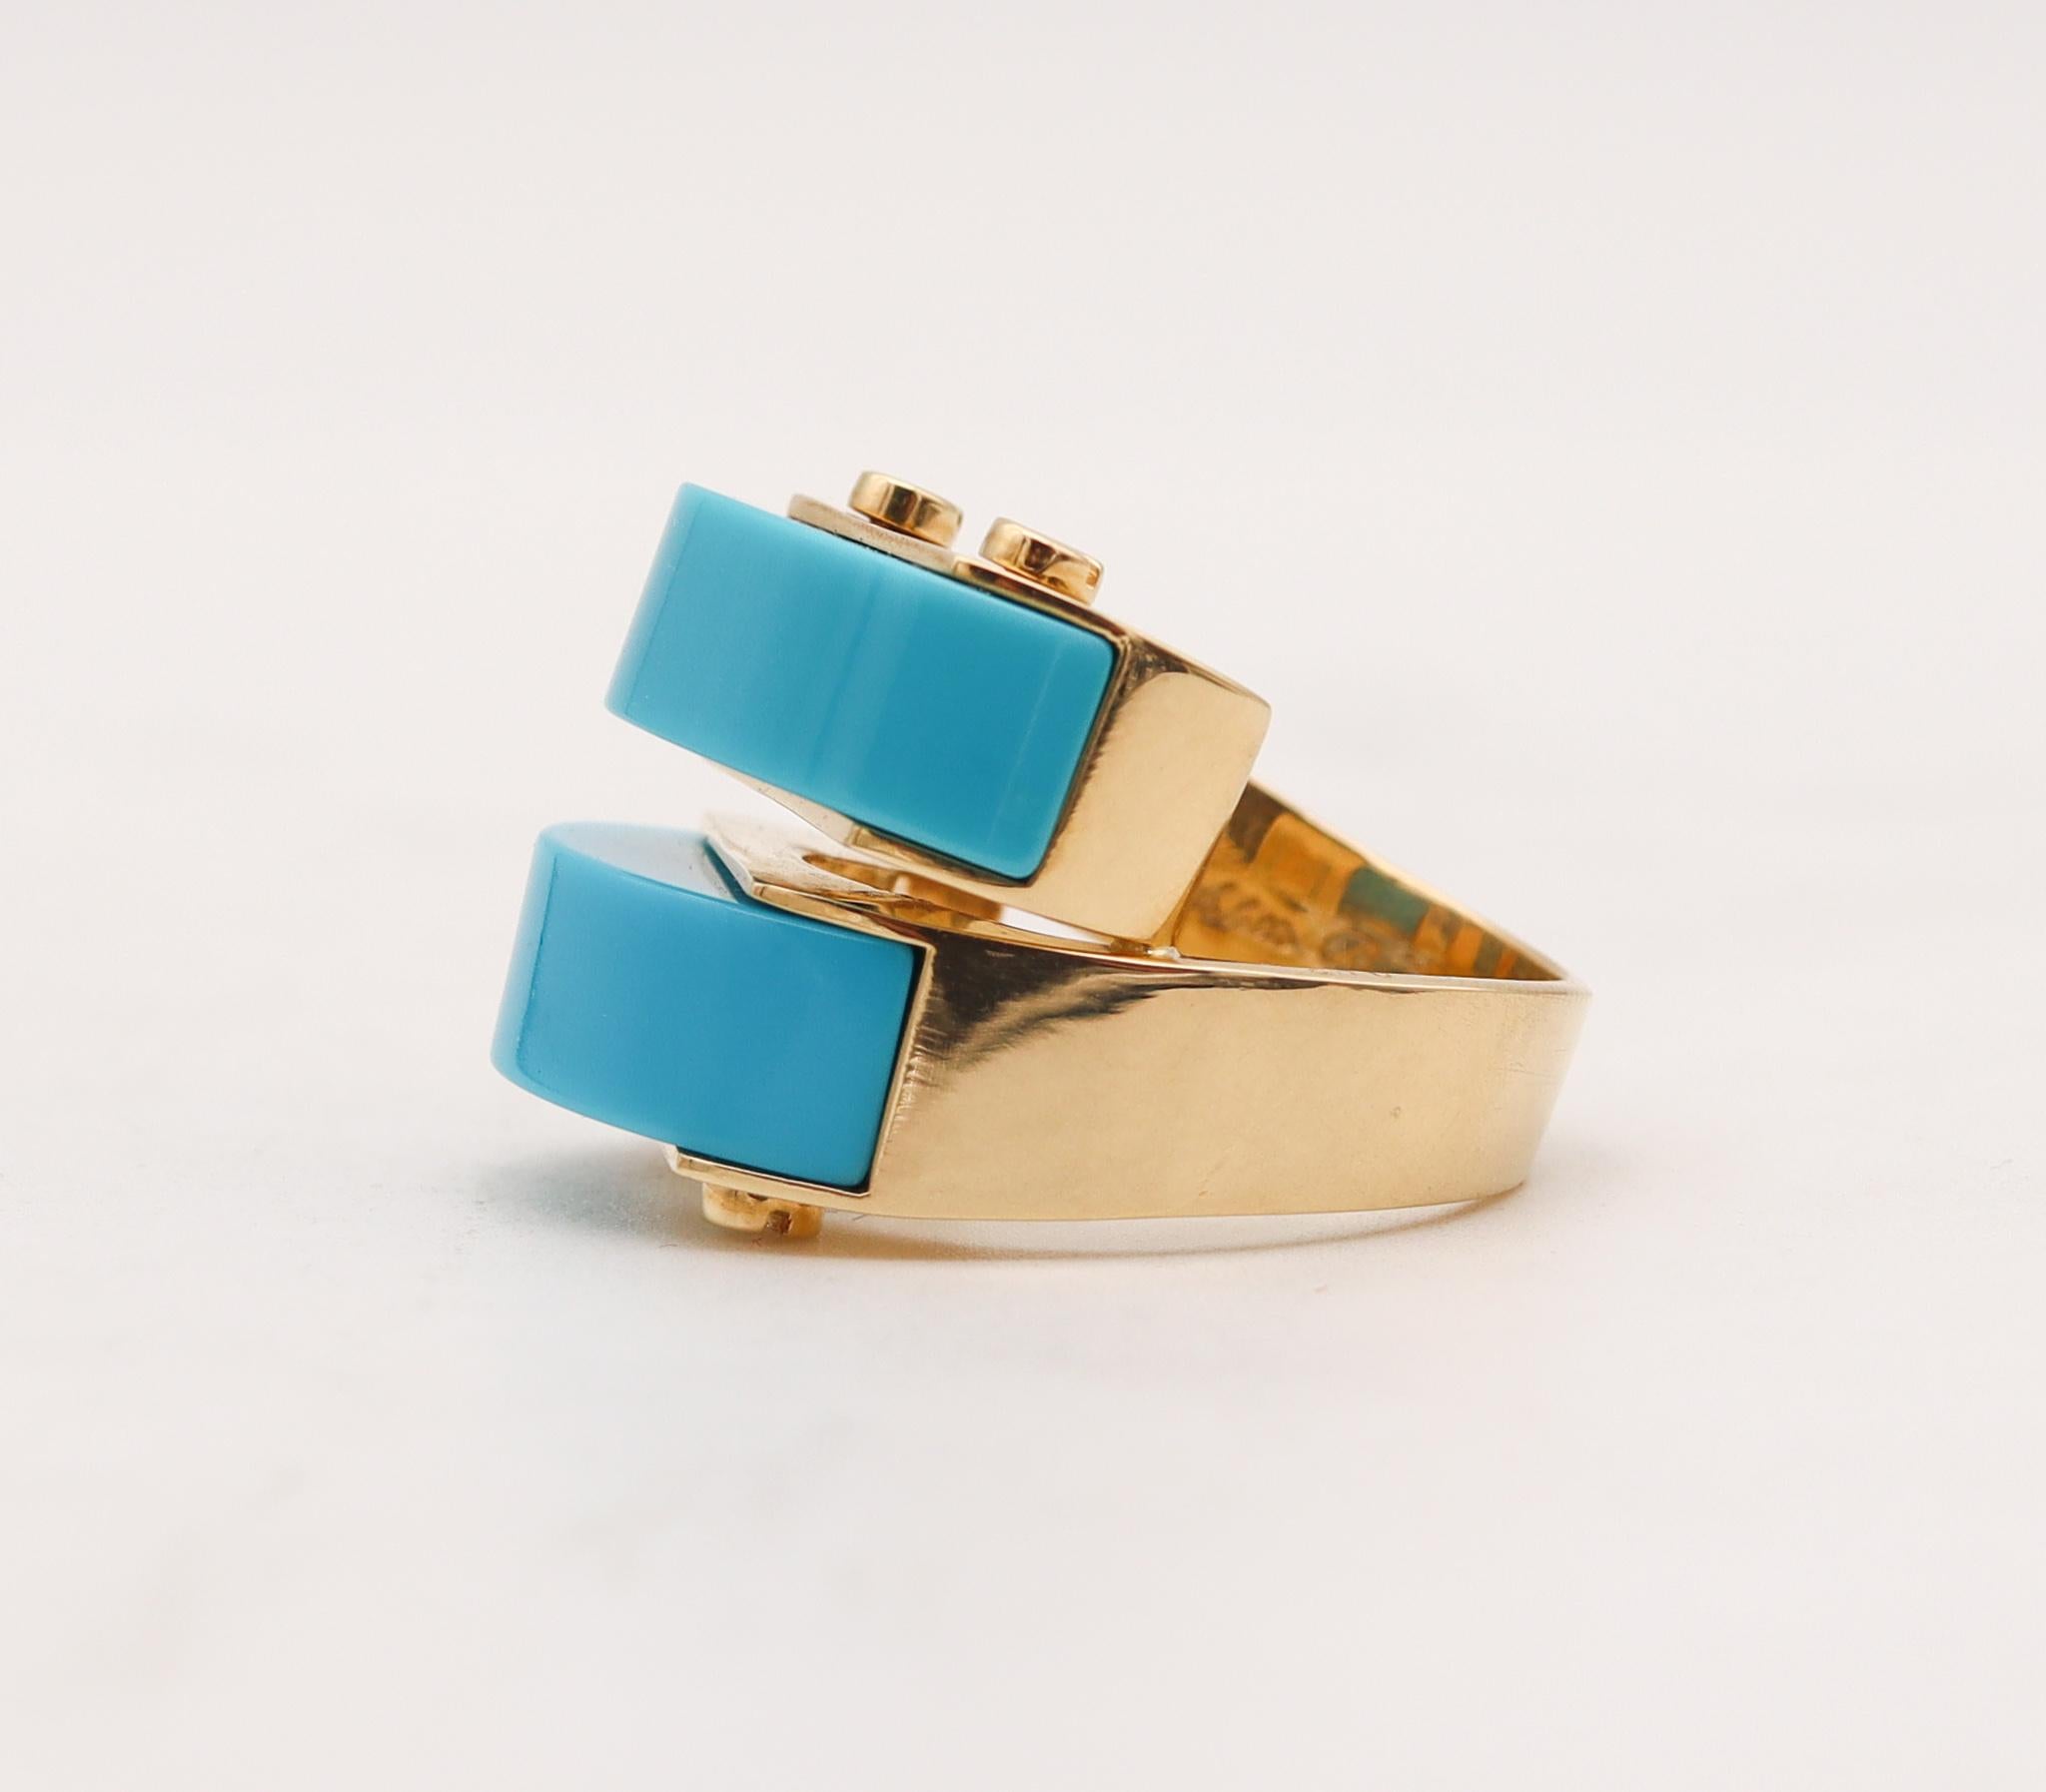 Aletto Brothers Sculptural Cocktail Ring in 18kt Yellow Gold with Turquoises In New Condition For Sale In Miami, FL